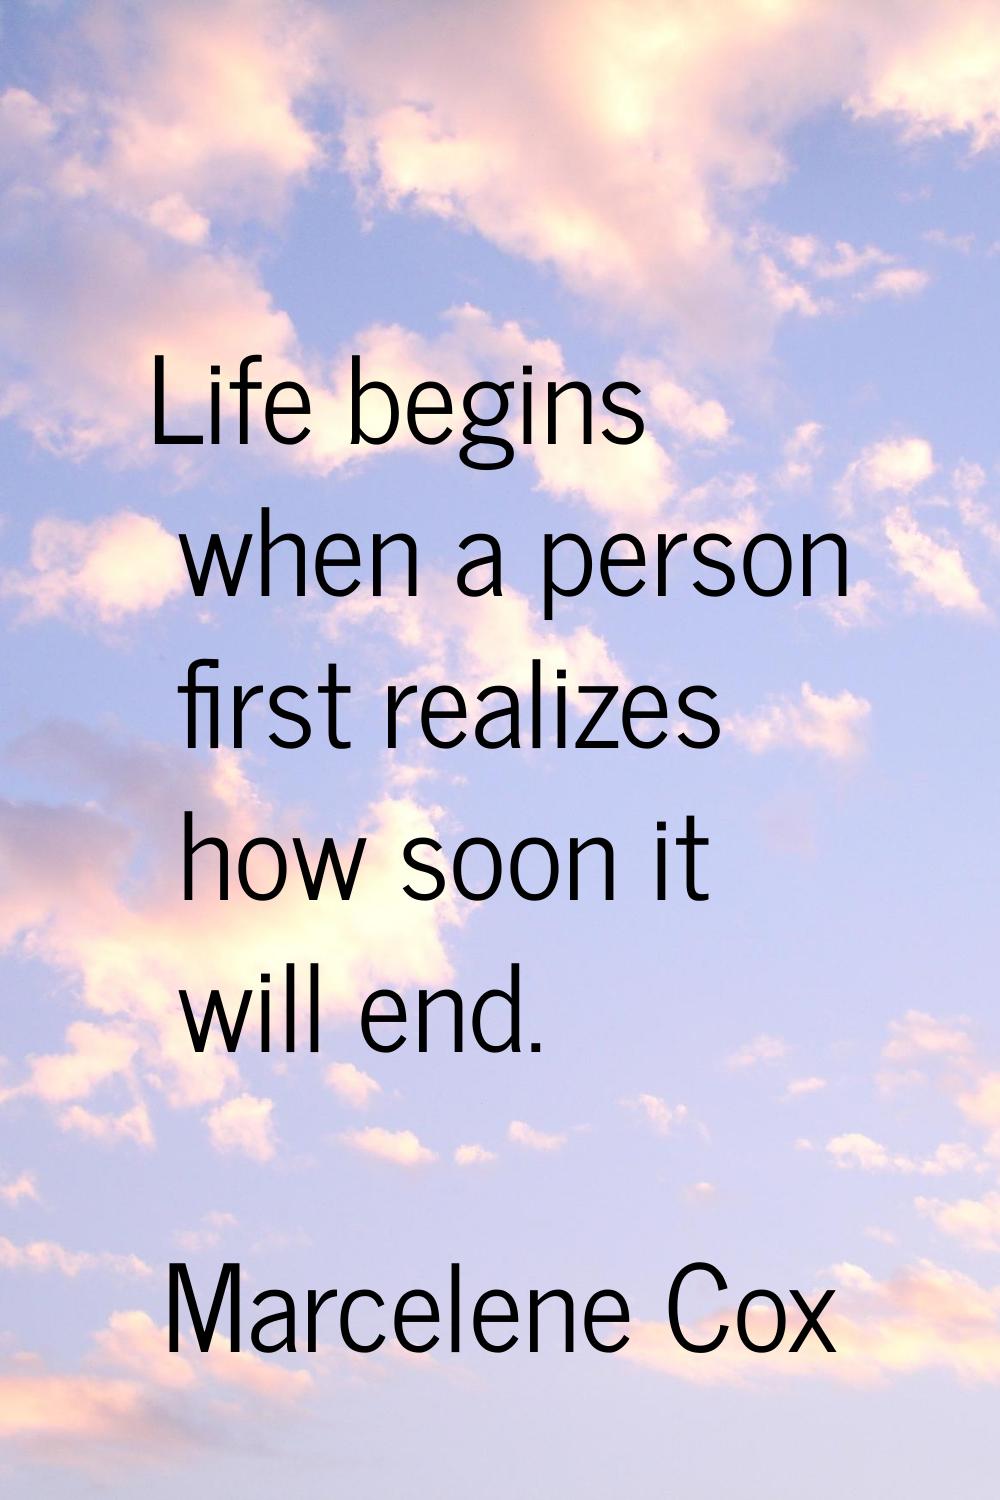 Life begins when a person first realizes how soon it will end.